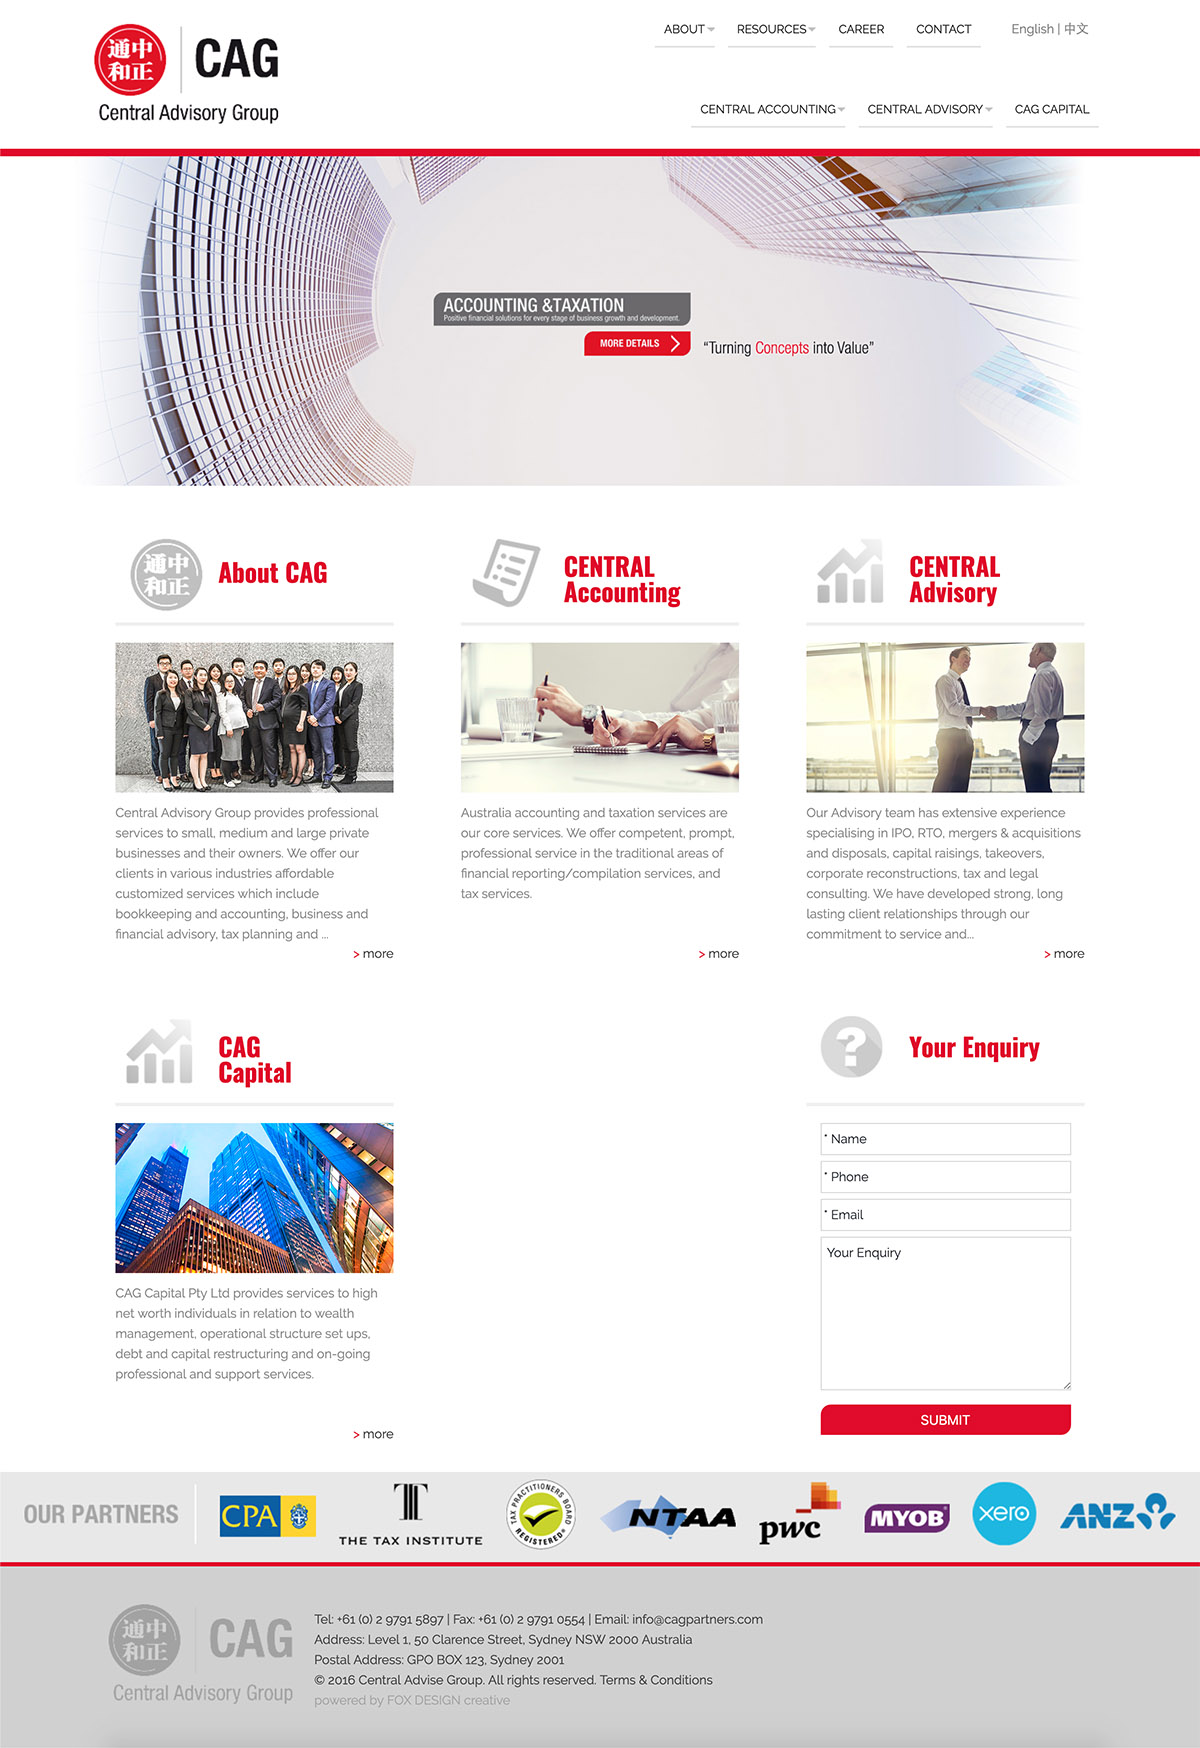 Central Advisory Group website design and maintenance by FOX DESIGN